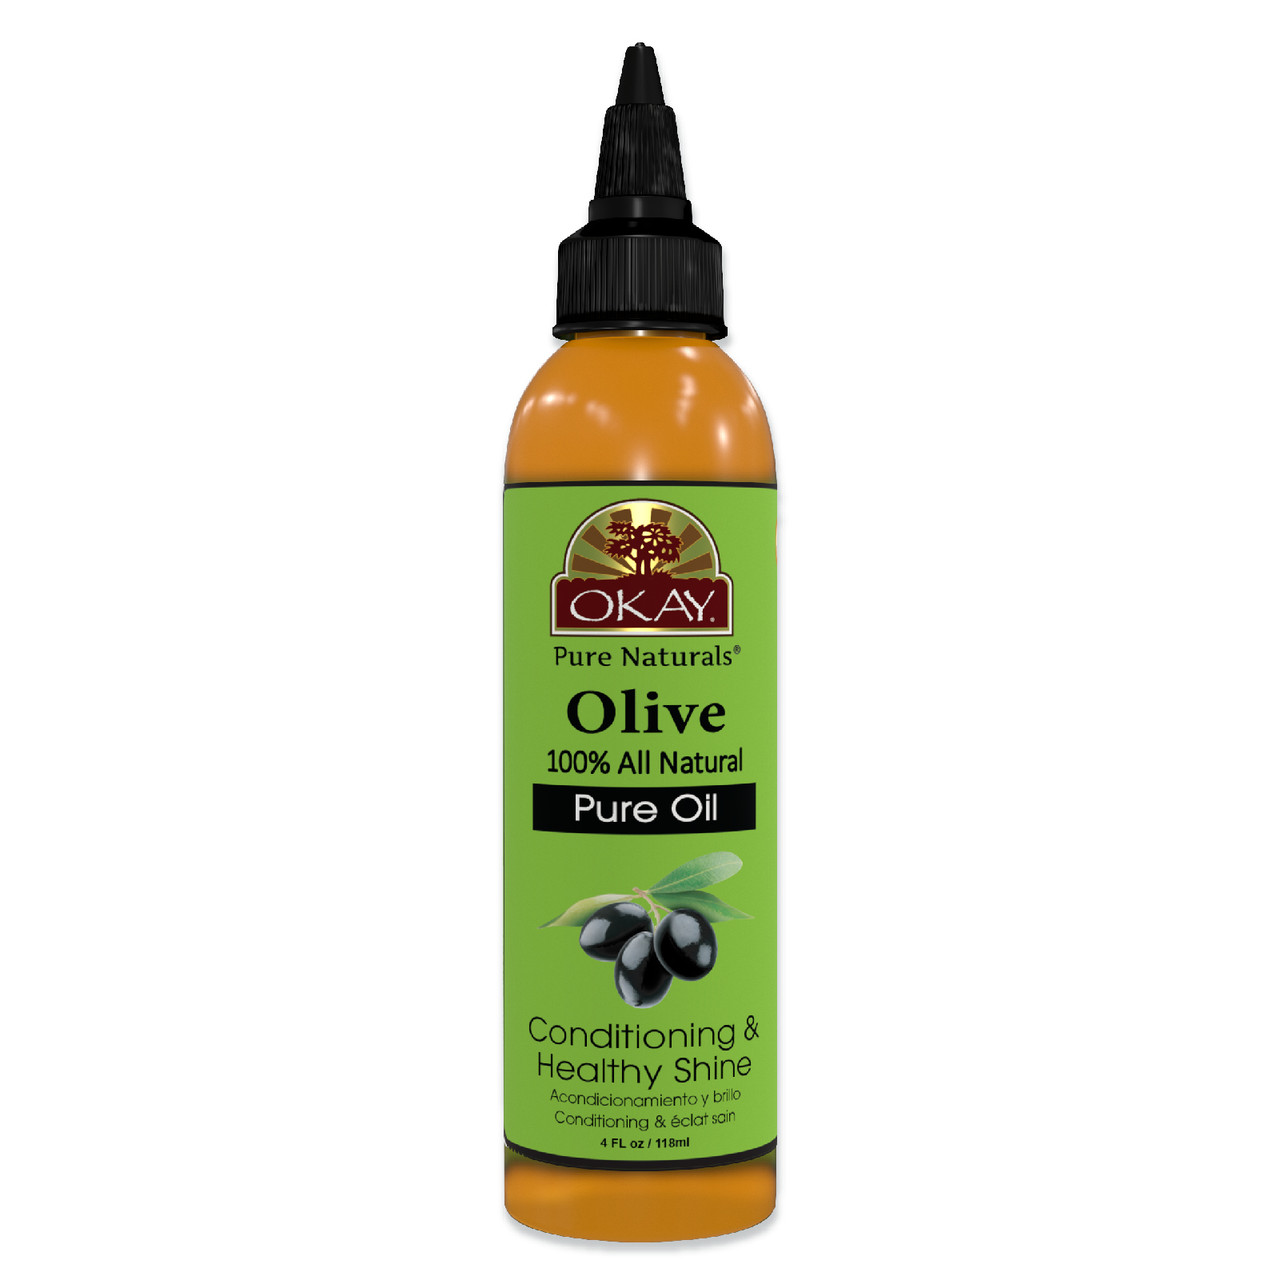 OKAY Pure Naturals 100% COCONUT OIL for HAIR & SKIN 4oz / 125ml